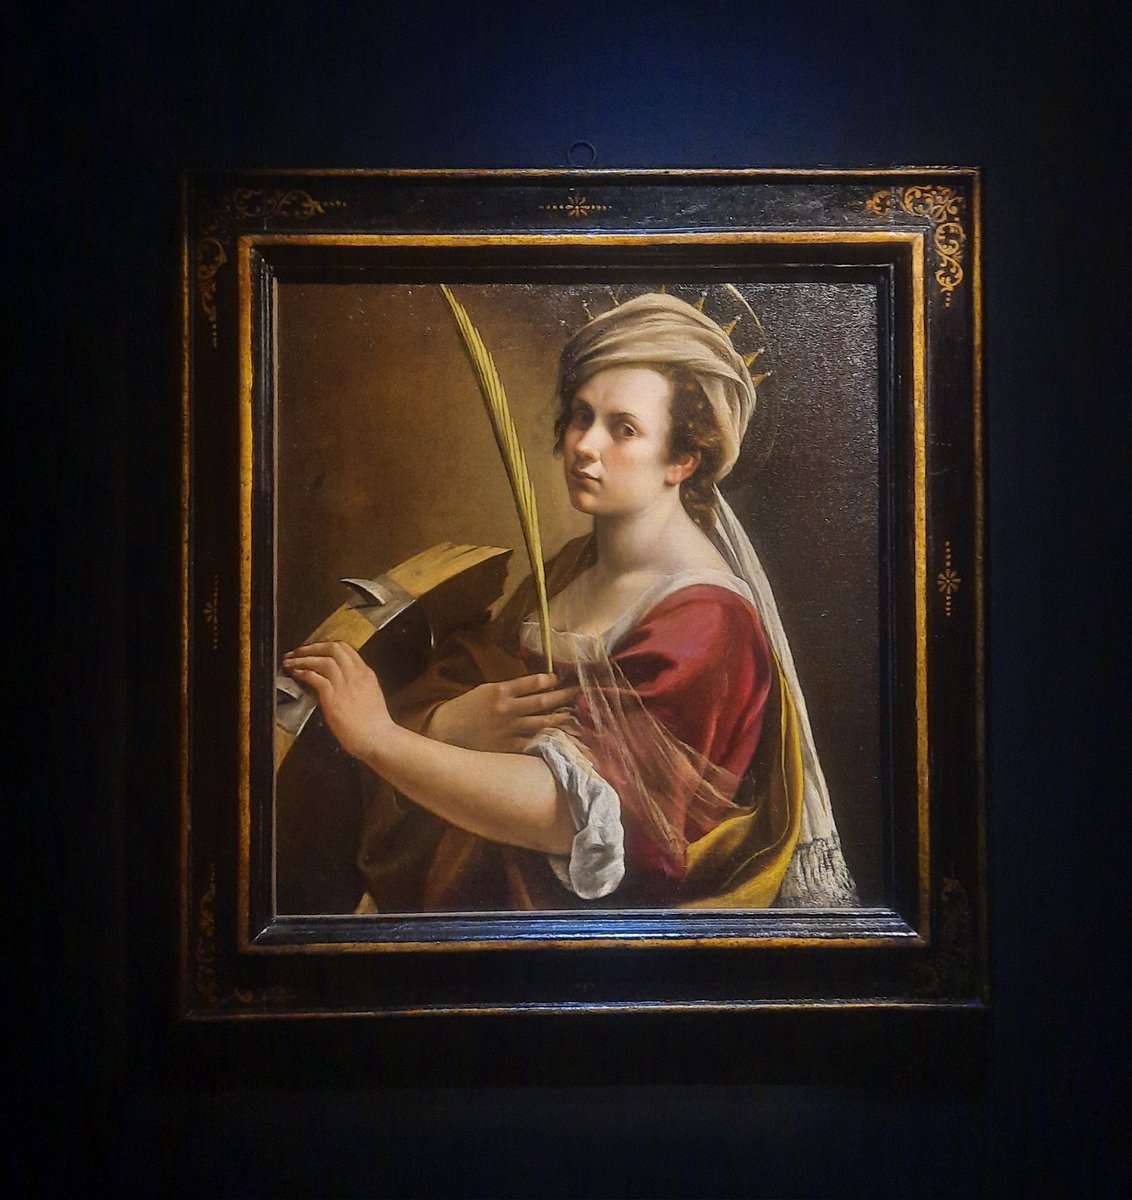 Artemisia Gentileschi has arrived @ikongallery, where she emerges from the darkness in 'Self-Portrait as Saint Catherine of Alexandria', clutching a palm frond, symbolic of martyrdom. Such spectacle!